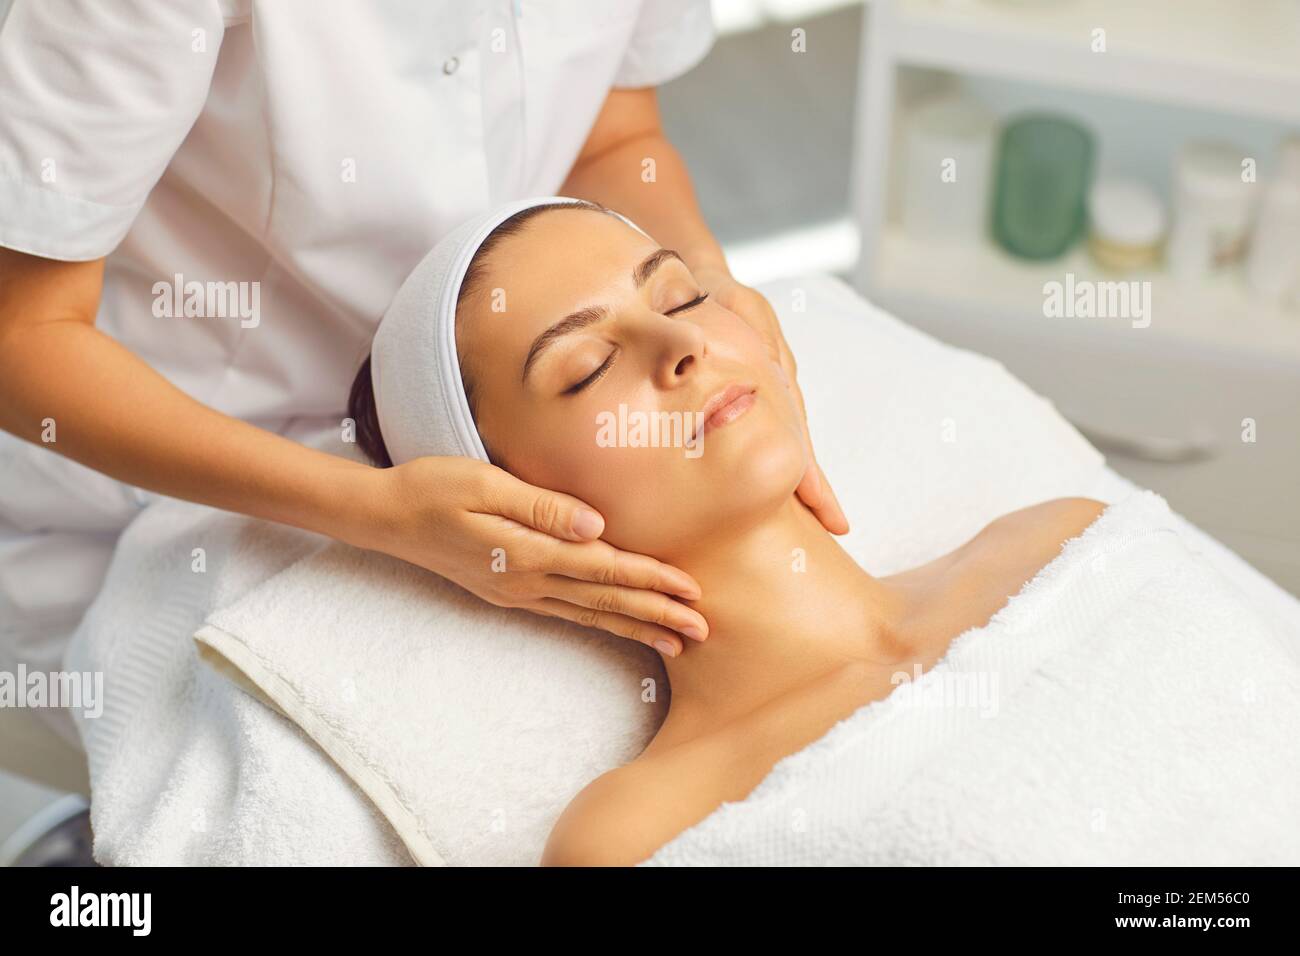 Hands of cosmetologist making manual relaxing rejuvenating facial massage for young woman Stock Photo